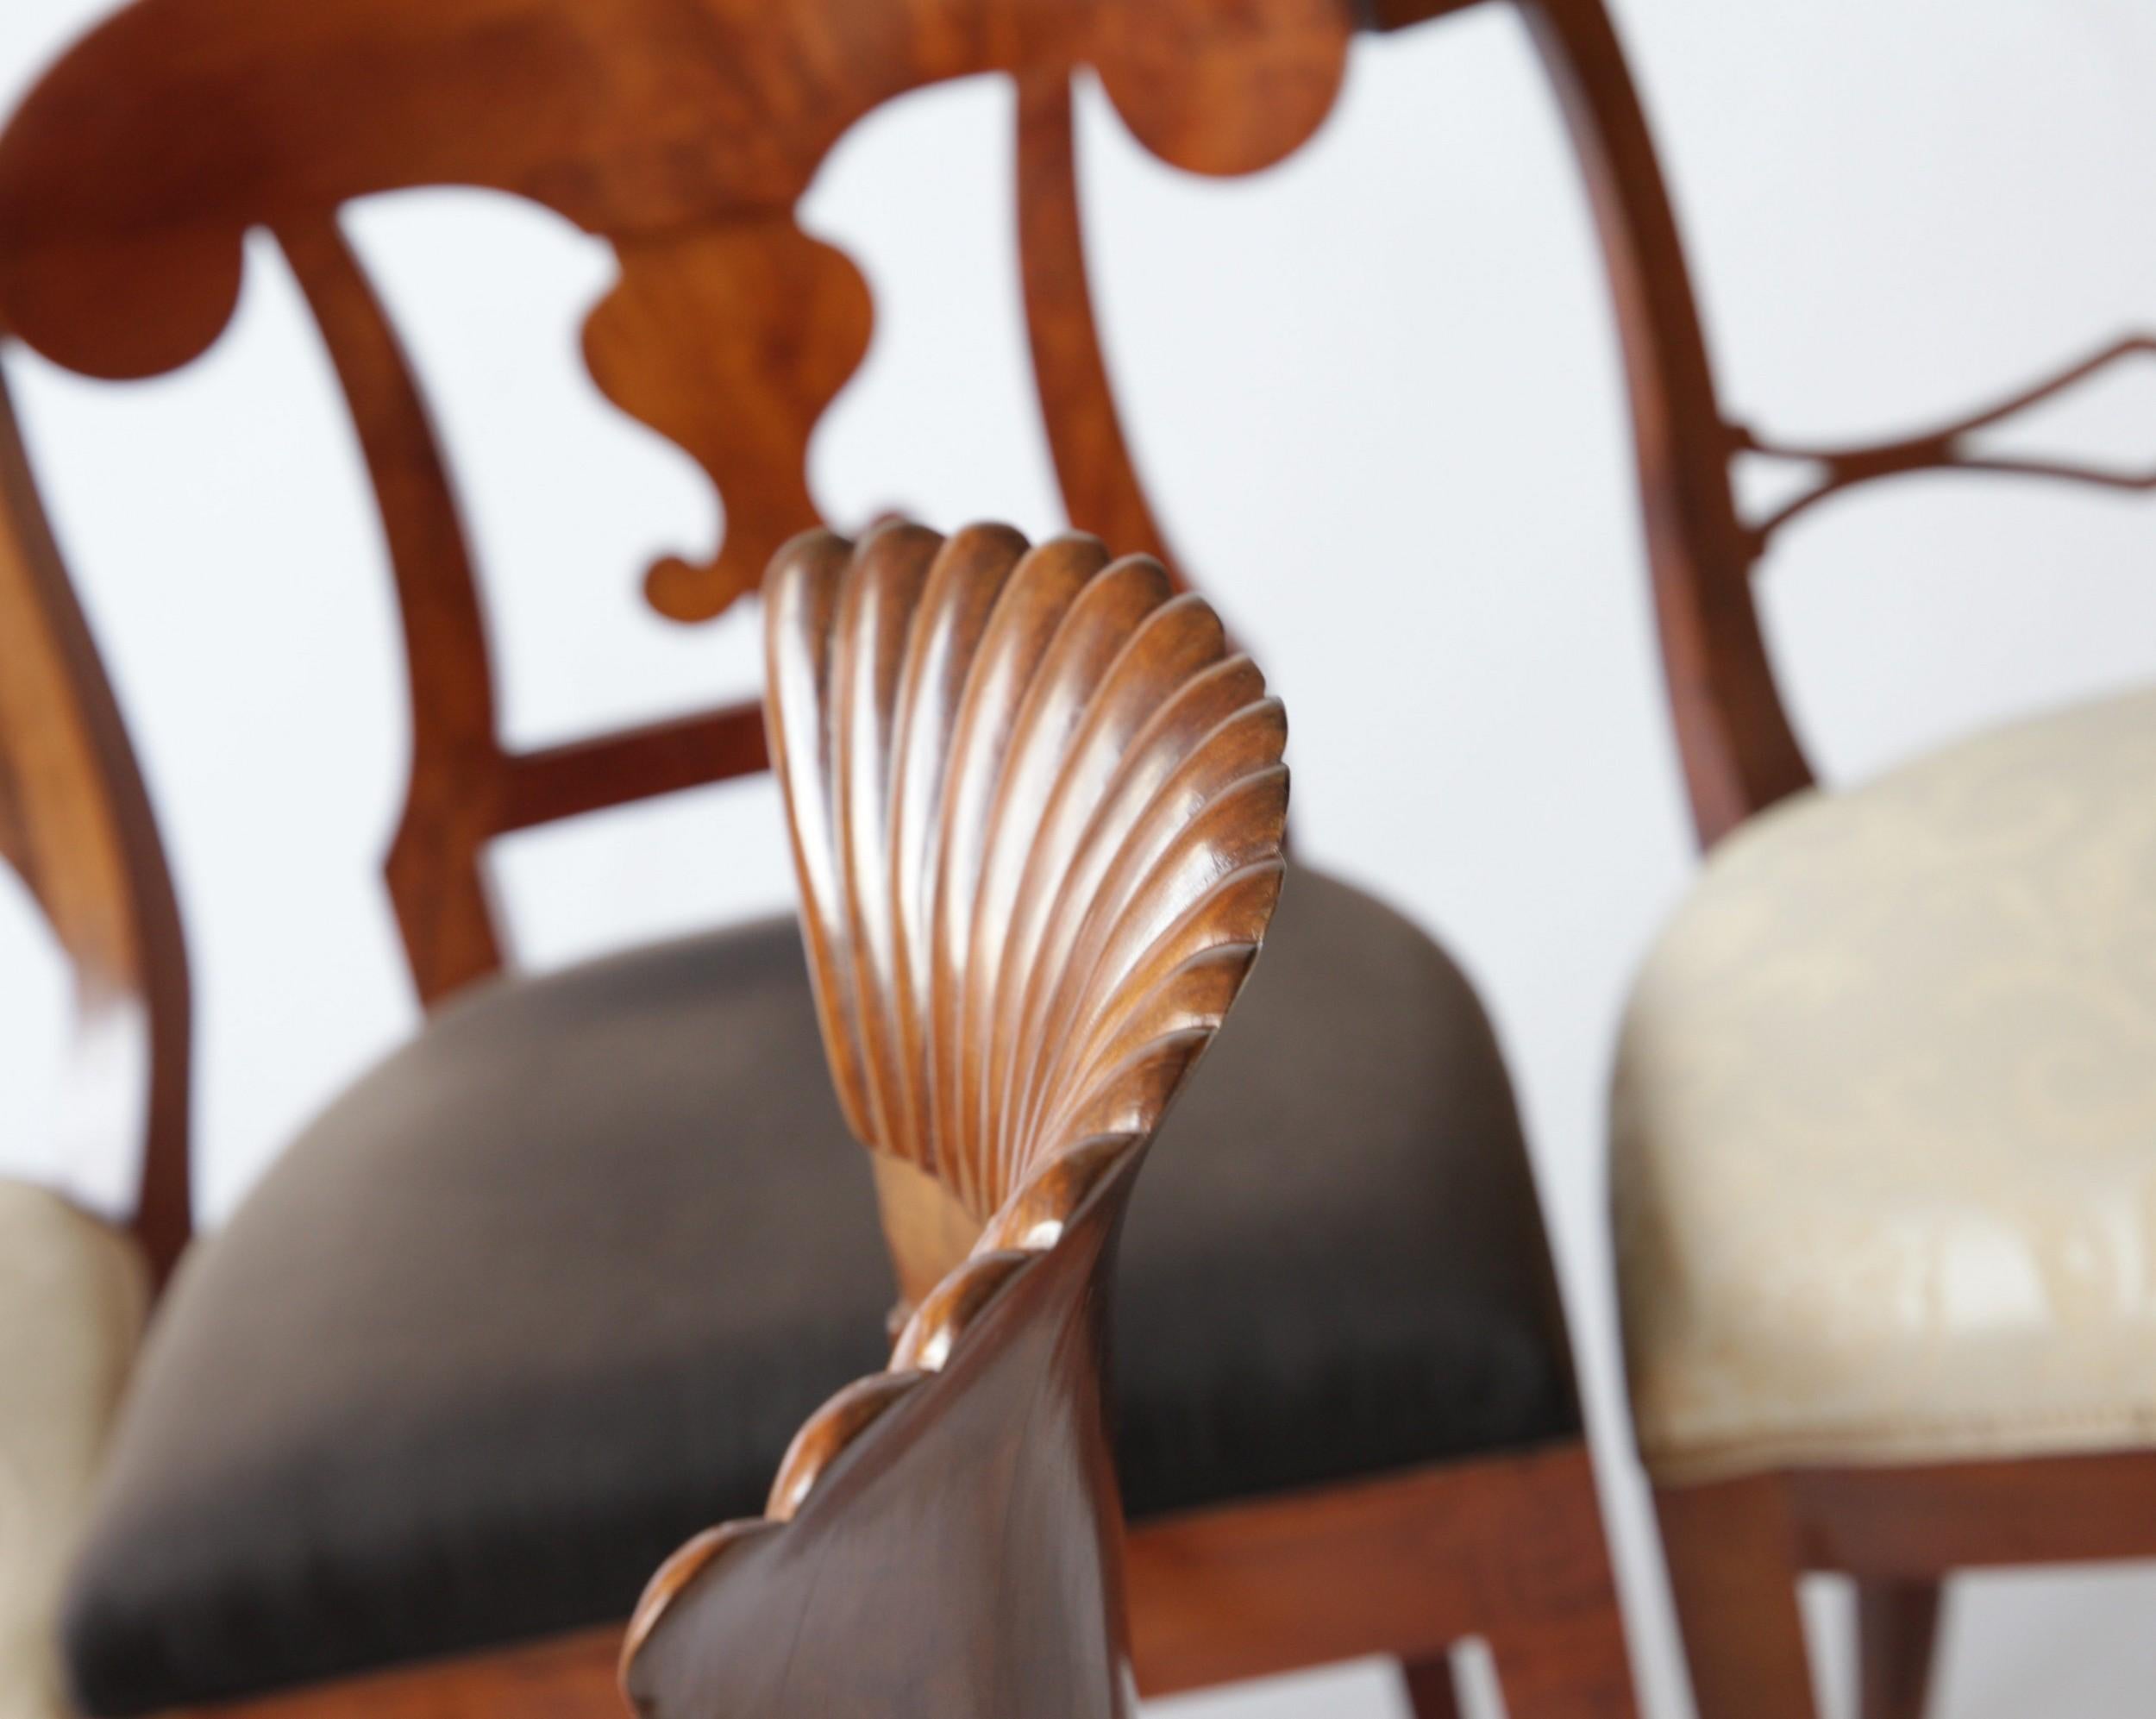 19th Century Biedermeier Eclectic Set Unique Set of 10 Dining Chairs Each in Different Design